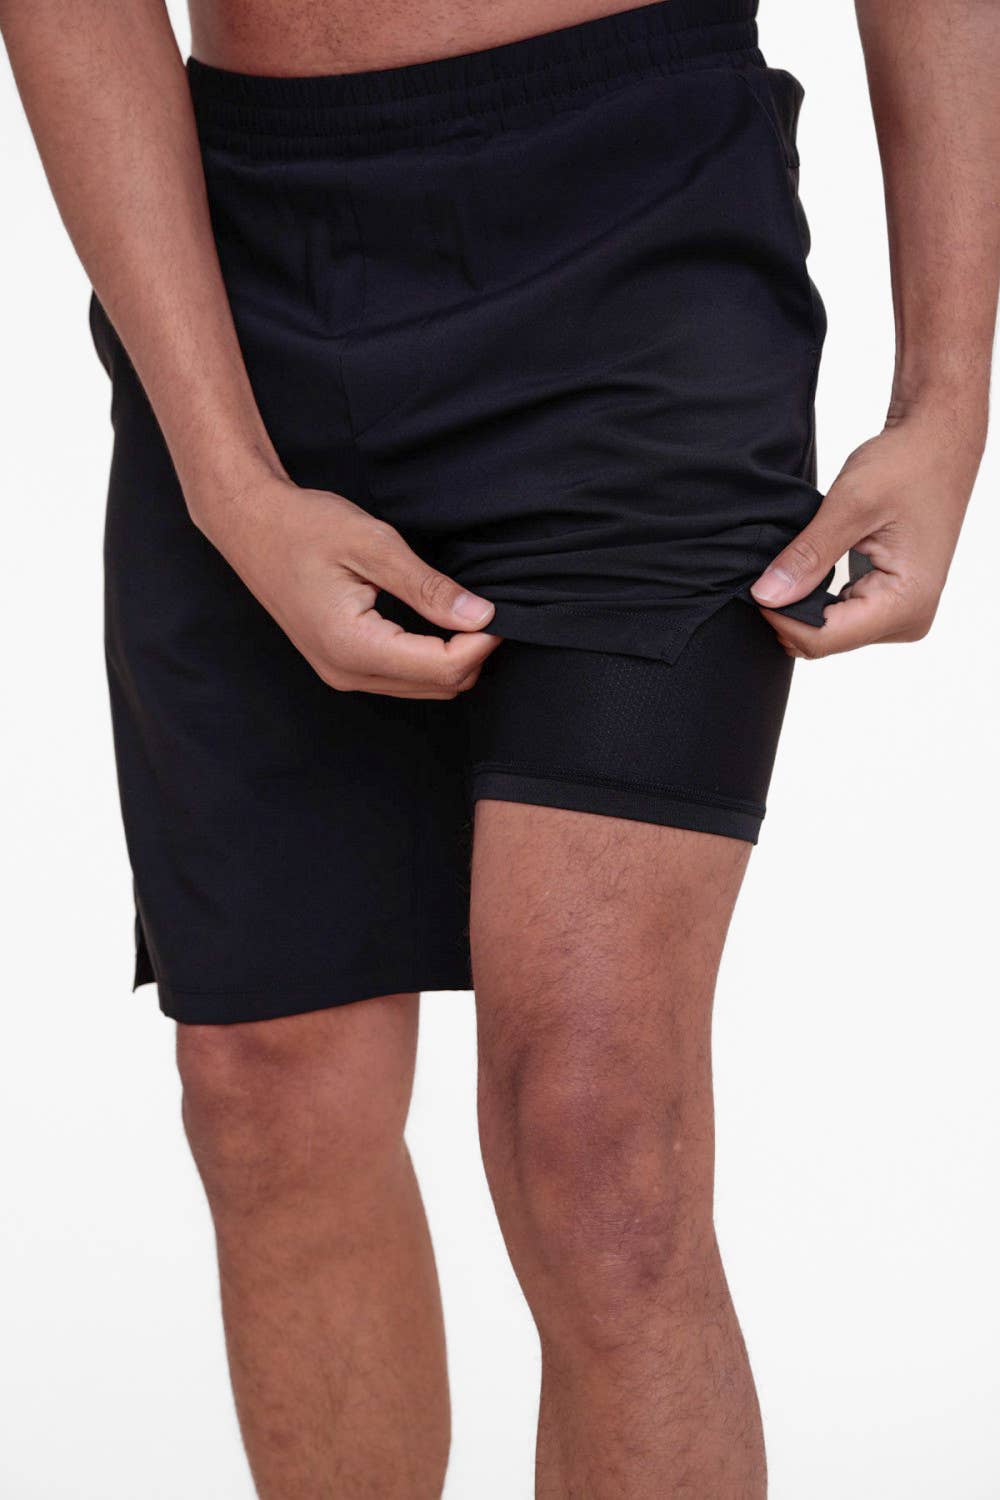 Stallion Active Shorts with Inner Lining- Olive